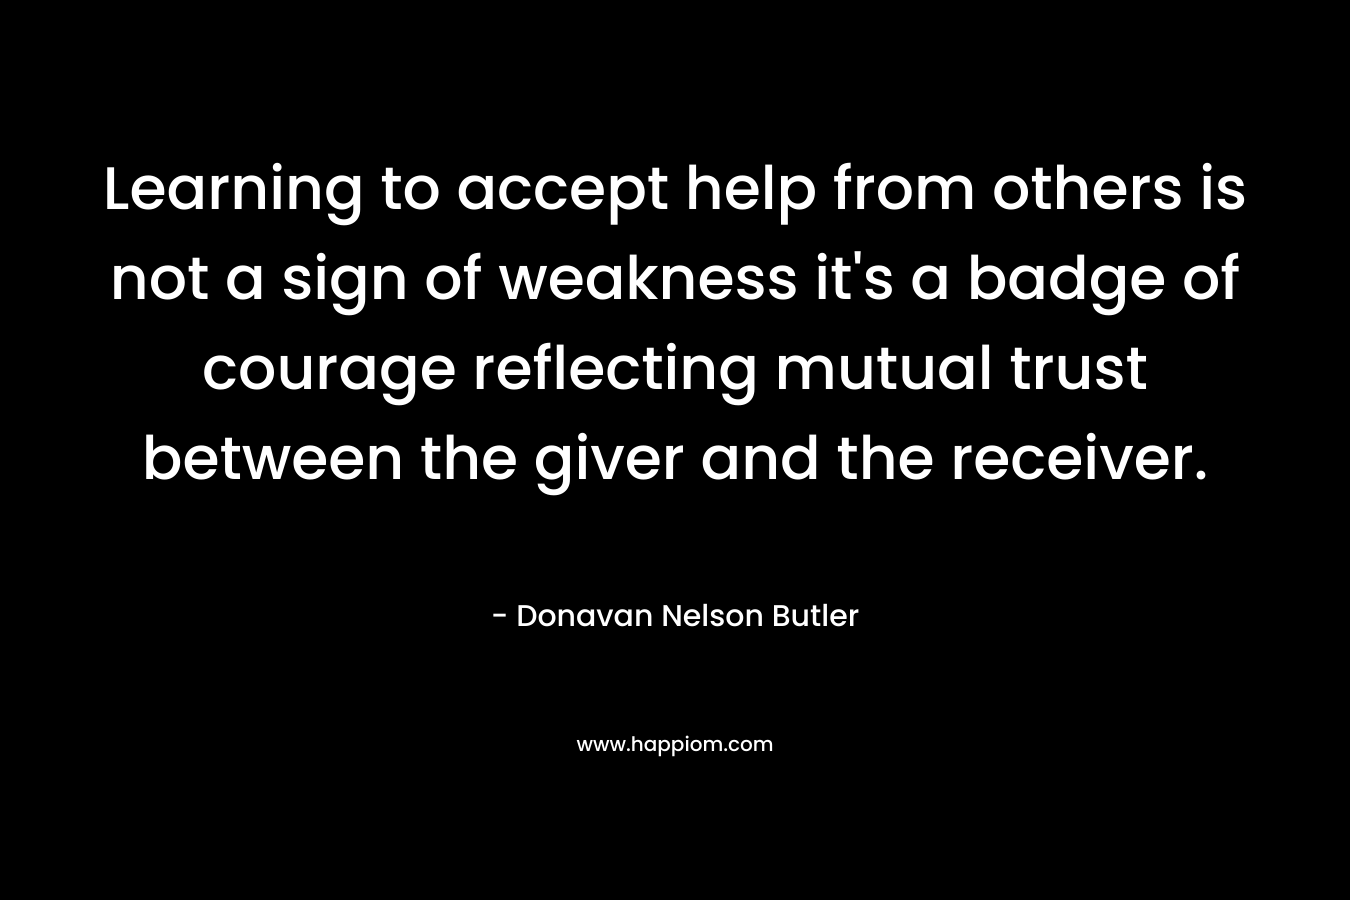 Learning to accept help from others is not a sign of weakness it’s a badge of courage reflecting mutual trust between the giver and the receiver. – Donavan Nelson Butler